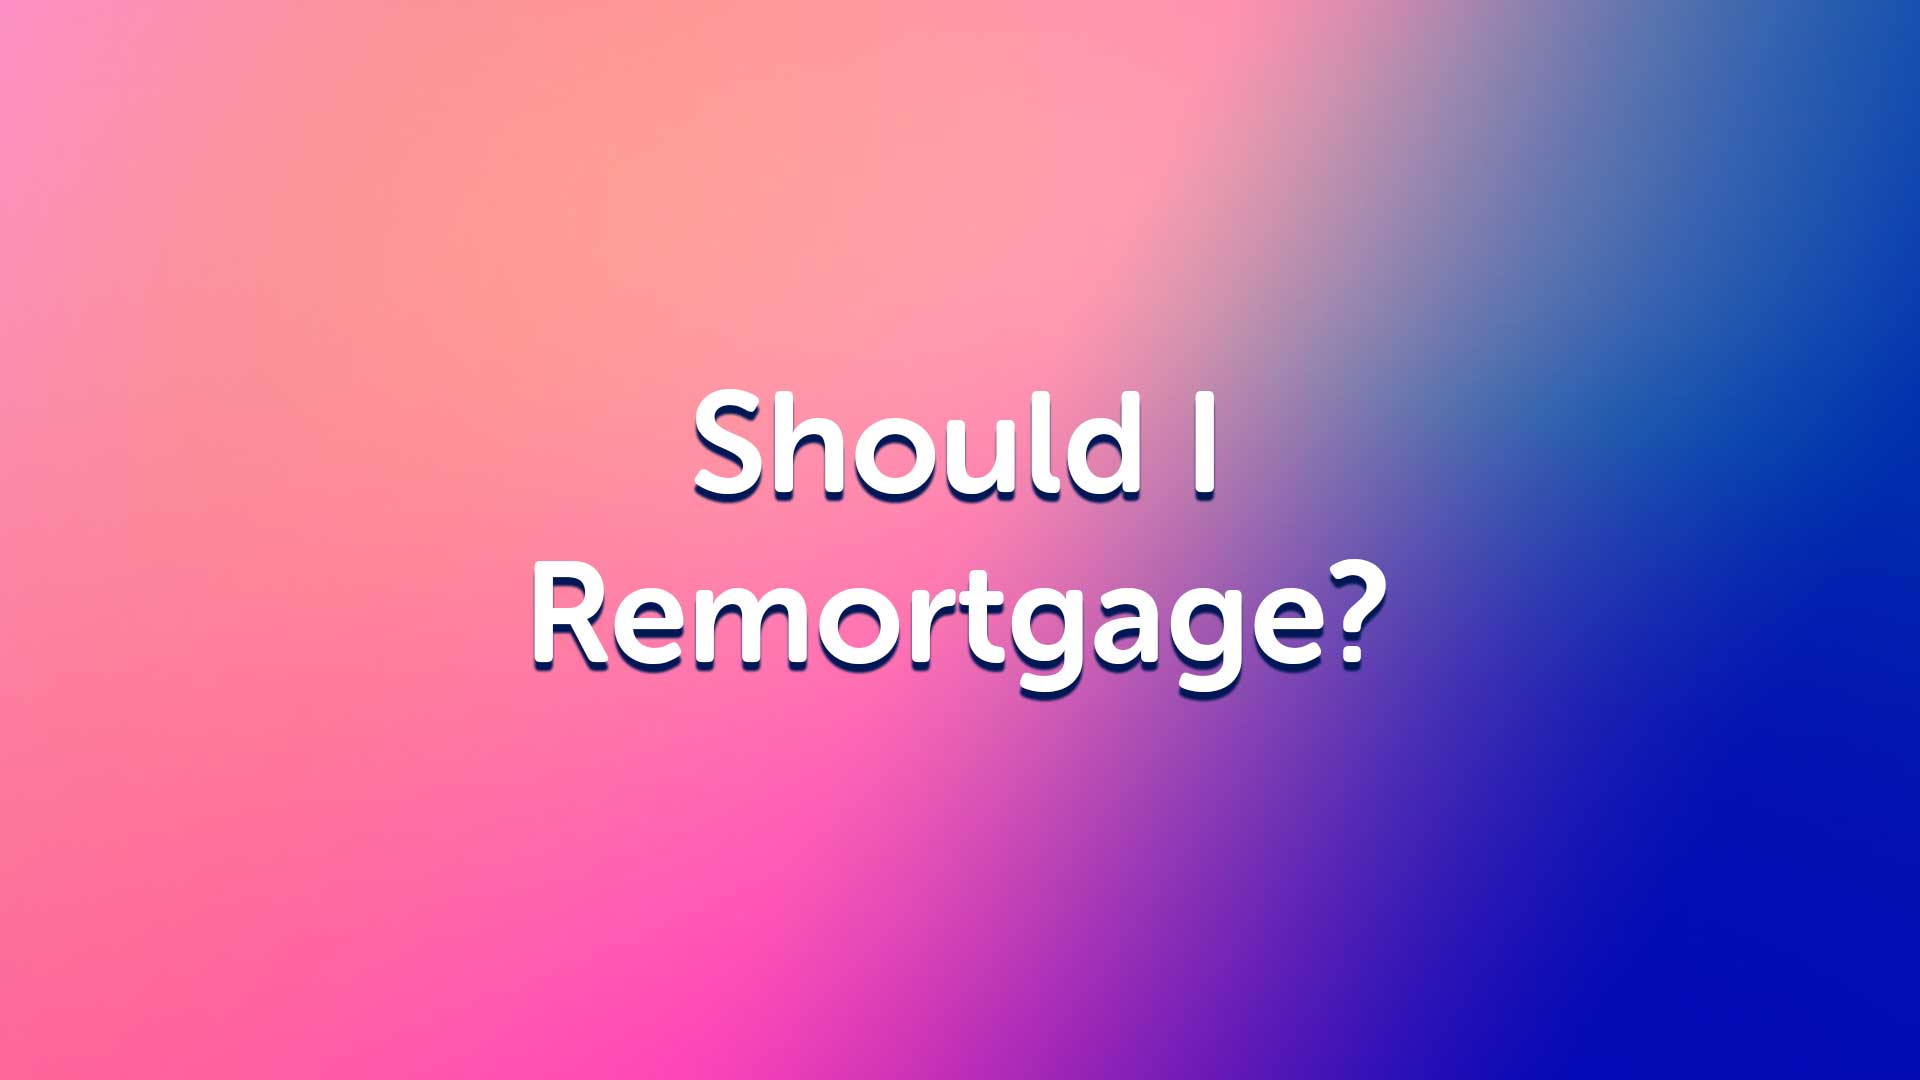 Should I Remortgage? | Remortgage Advice | Product Transfer Advice | Equity Release Advice | Mortgage Broker | UK Moneyman